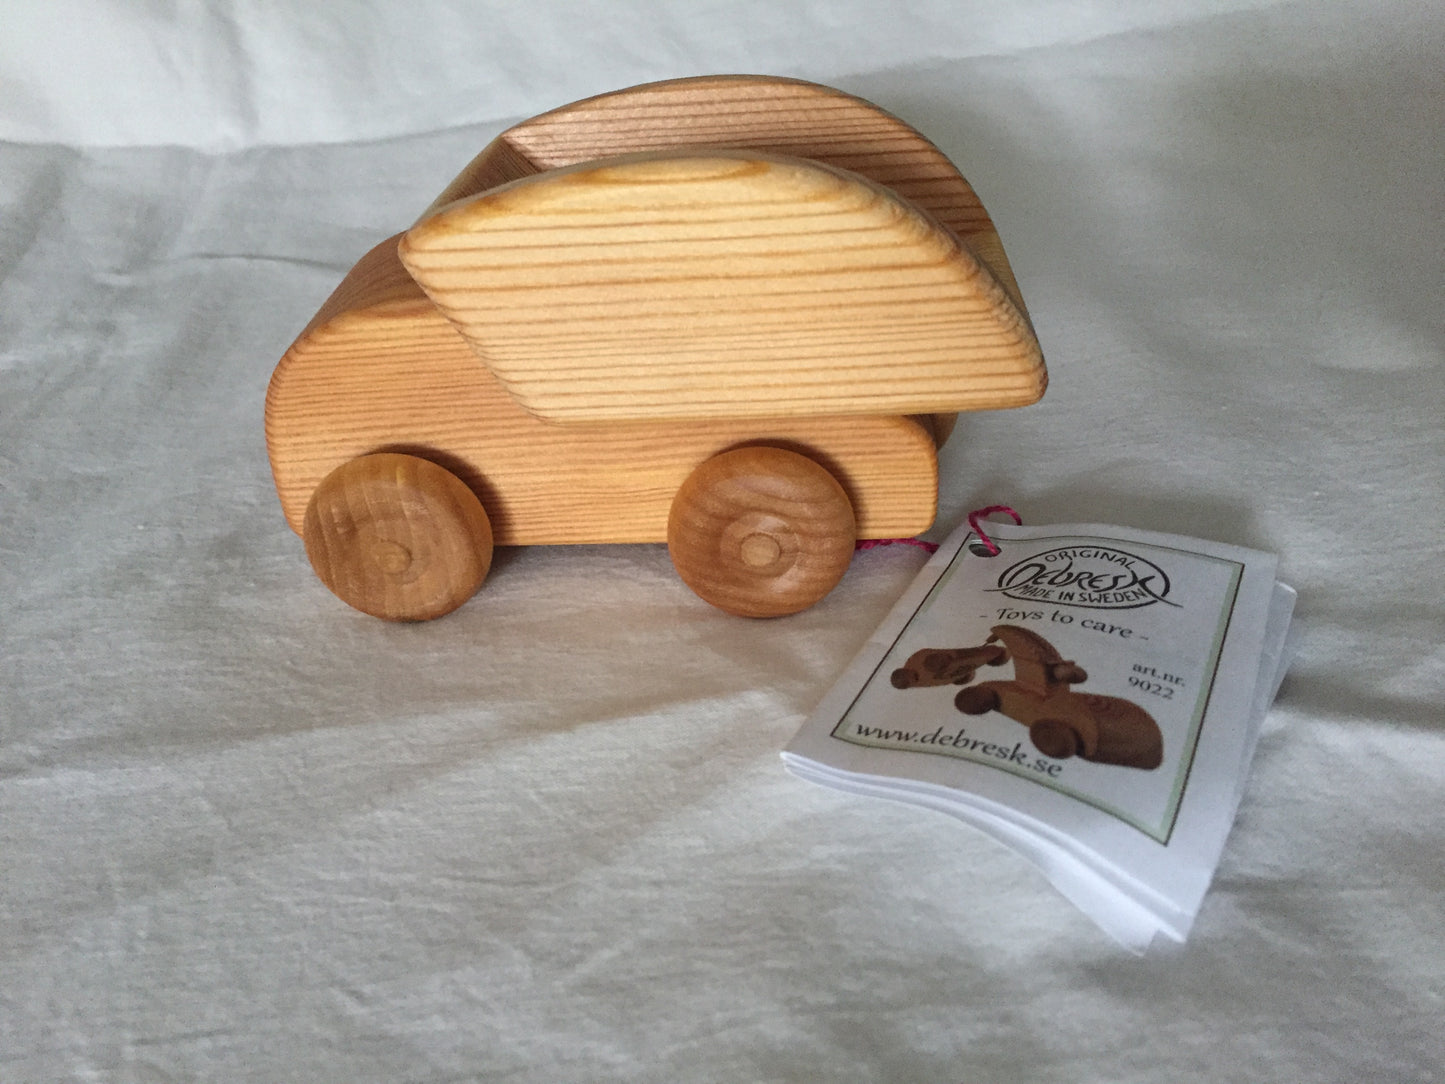 Wooden Toy - Debresk DUMPING LORRY, small